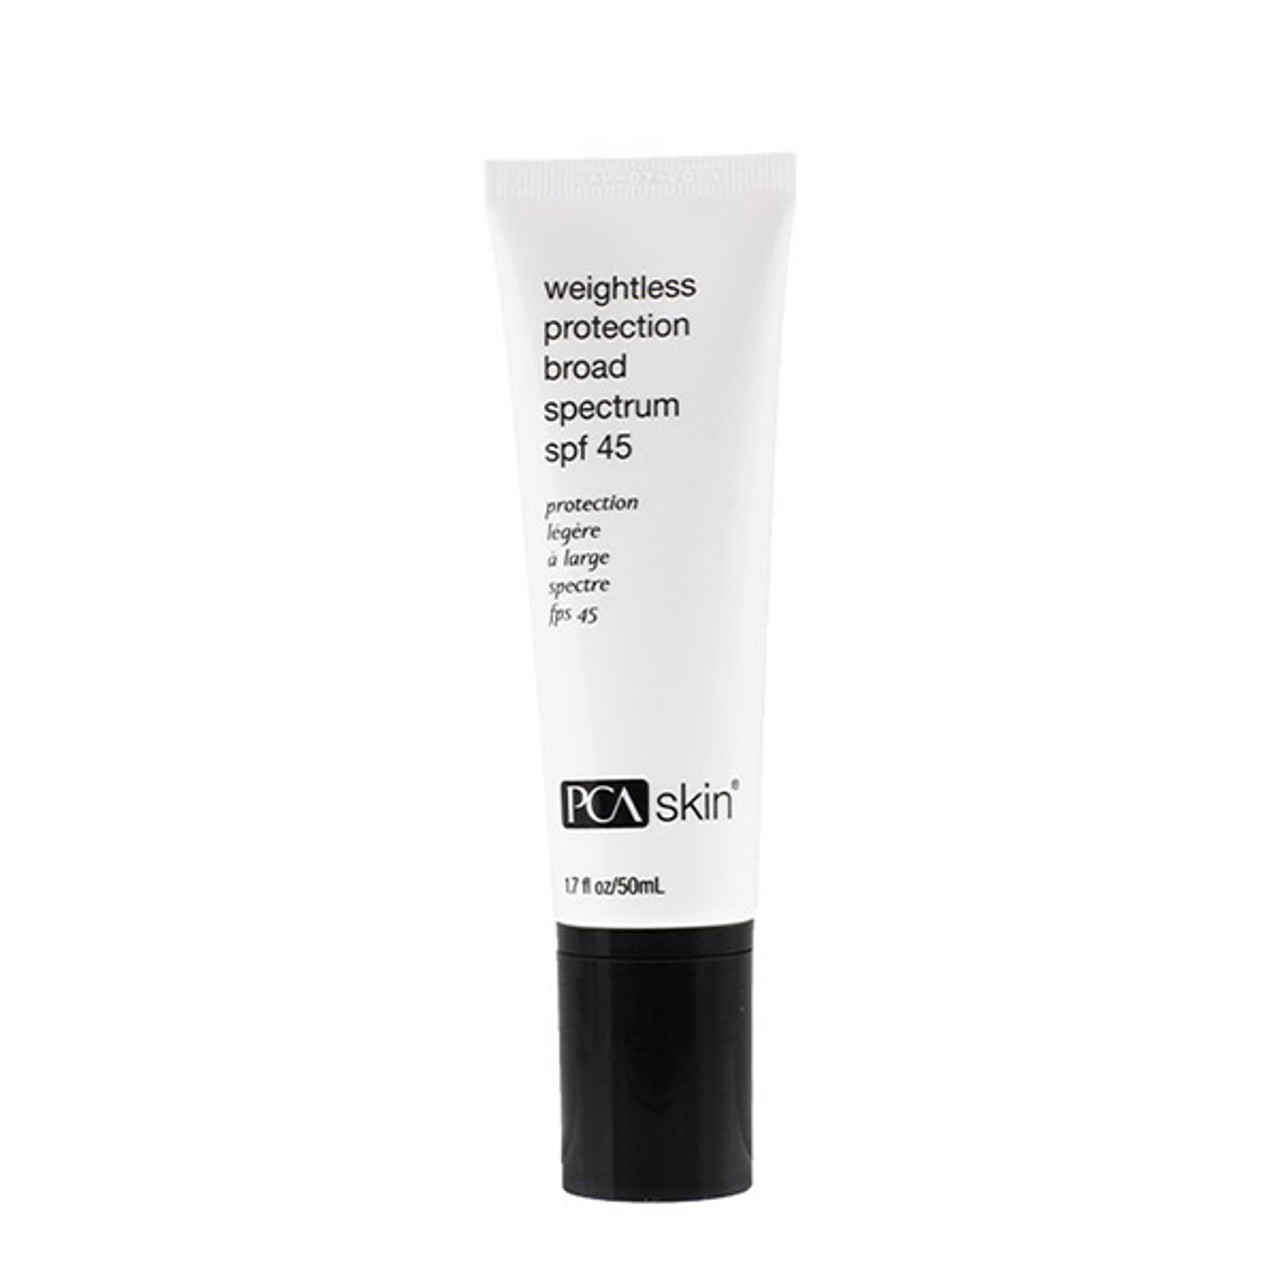 PCA Skin Weightless Protection SPF 45 - 1.7 oz